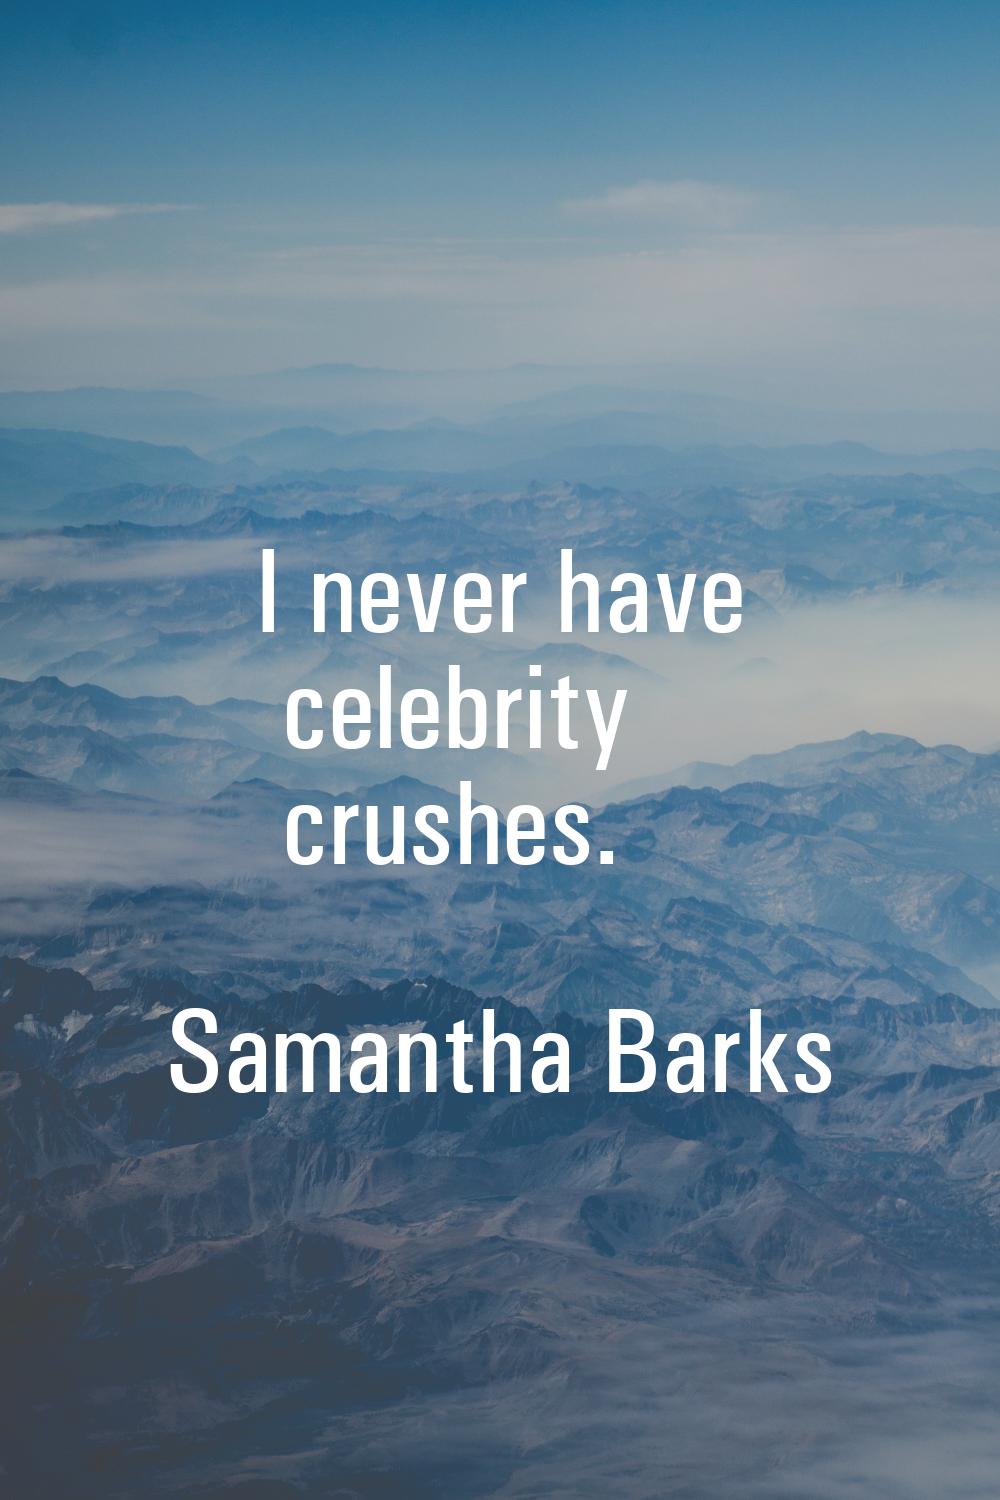 I never have celebrity crushes.